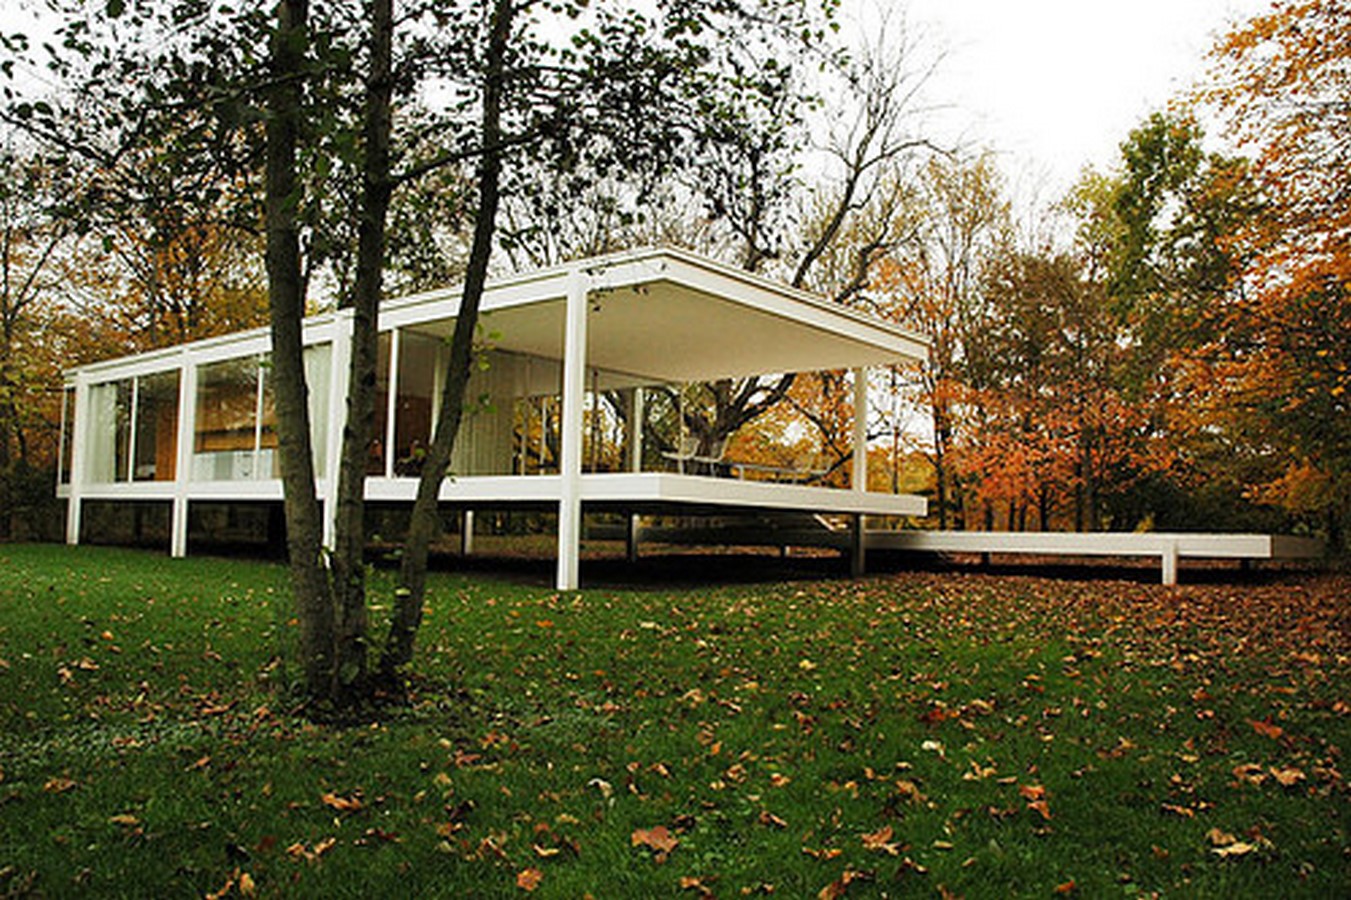 Farnsworth House by Mies van der Rohe: A bond between the House and Nature - Sheet5